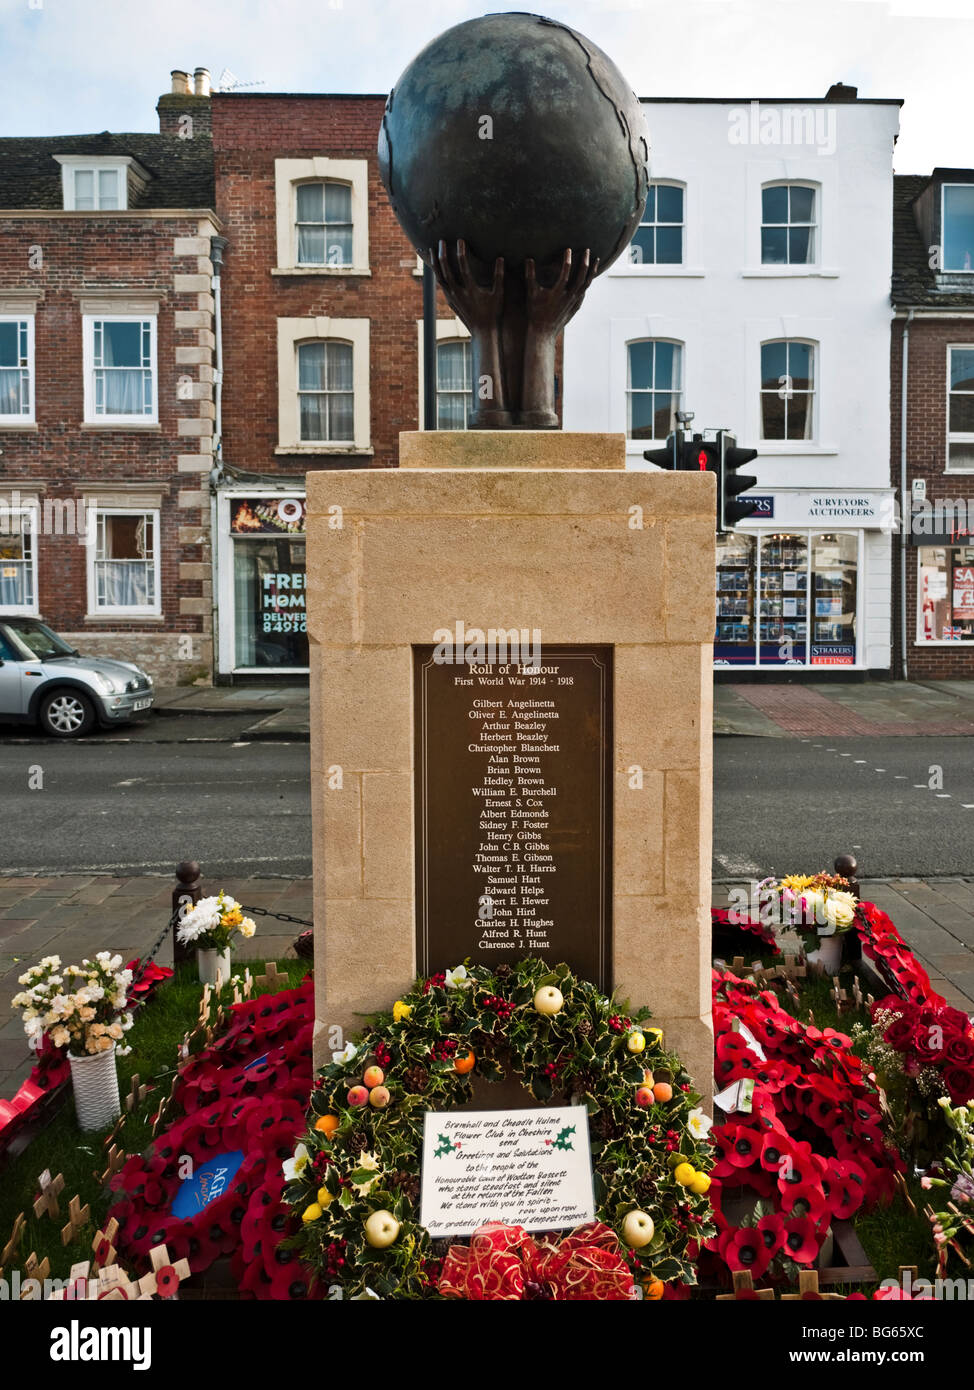 War memorial in Wootton Bassett with poppy wreaths, Christmas wreath,  thank you message for the repatriation ceremonies 2009 Stock Photo